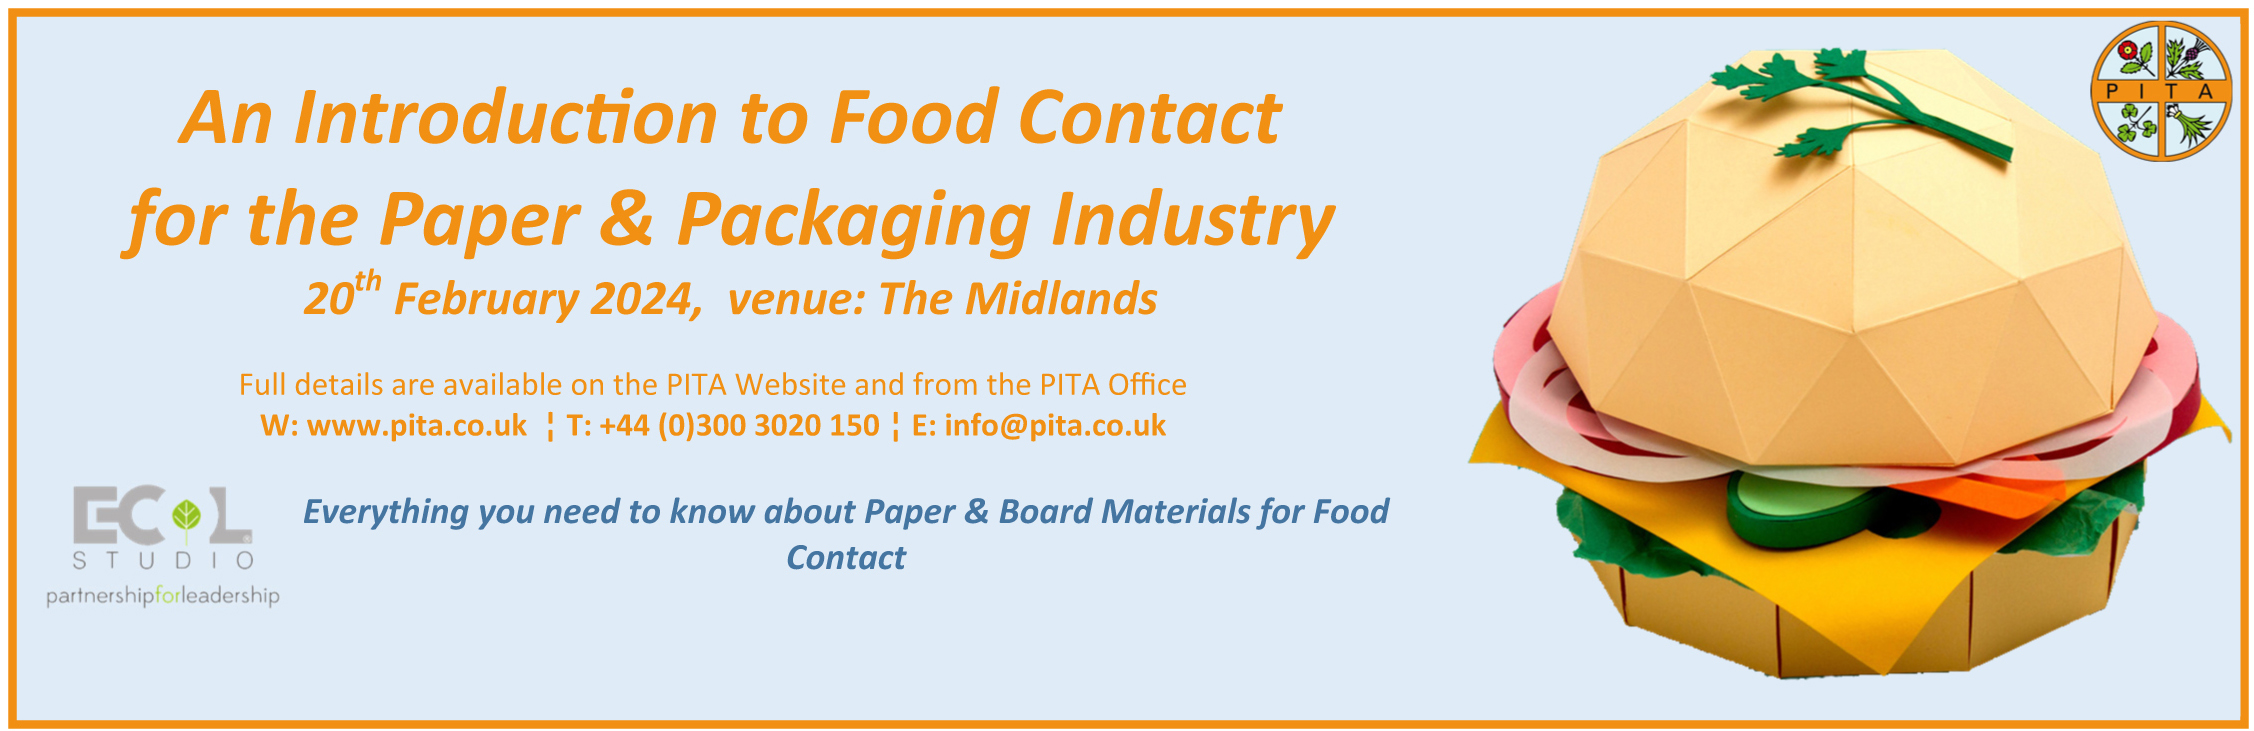 Food Contact Course Feb 2024